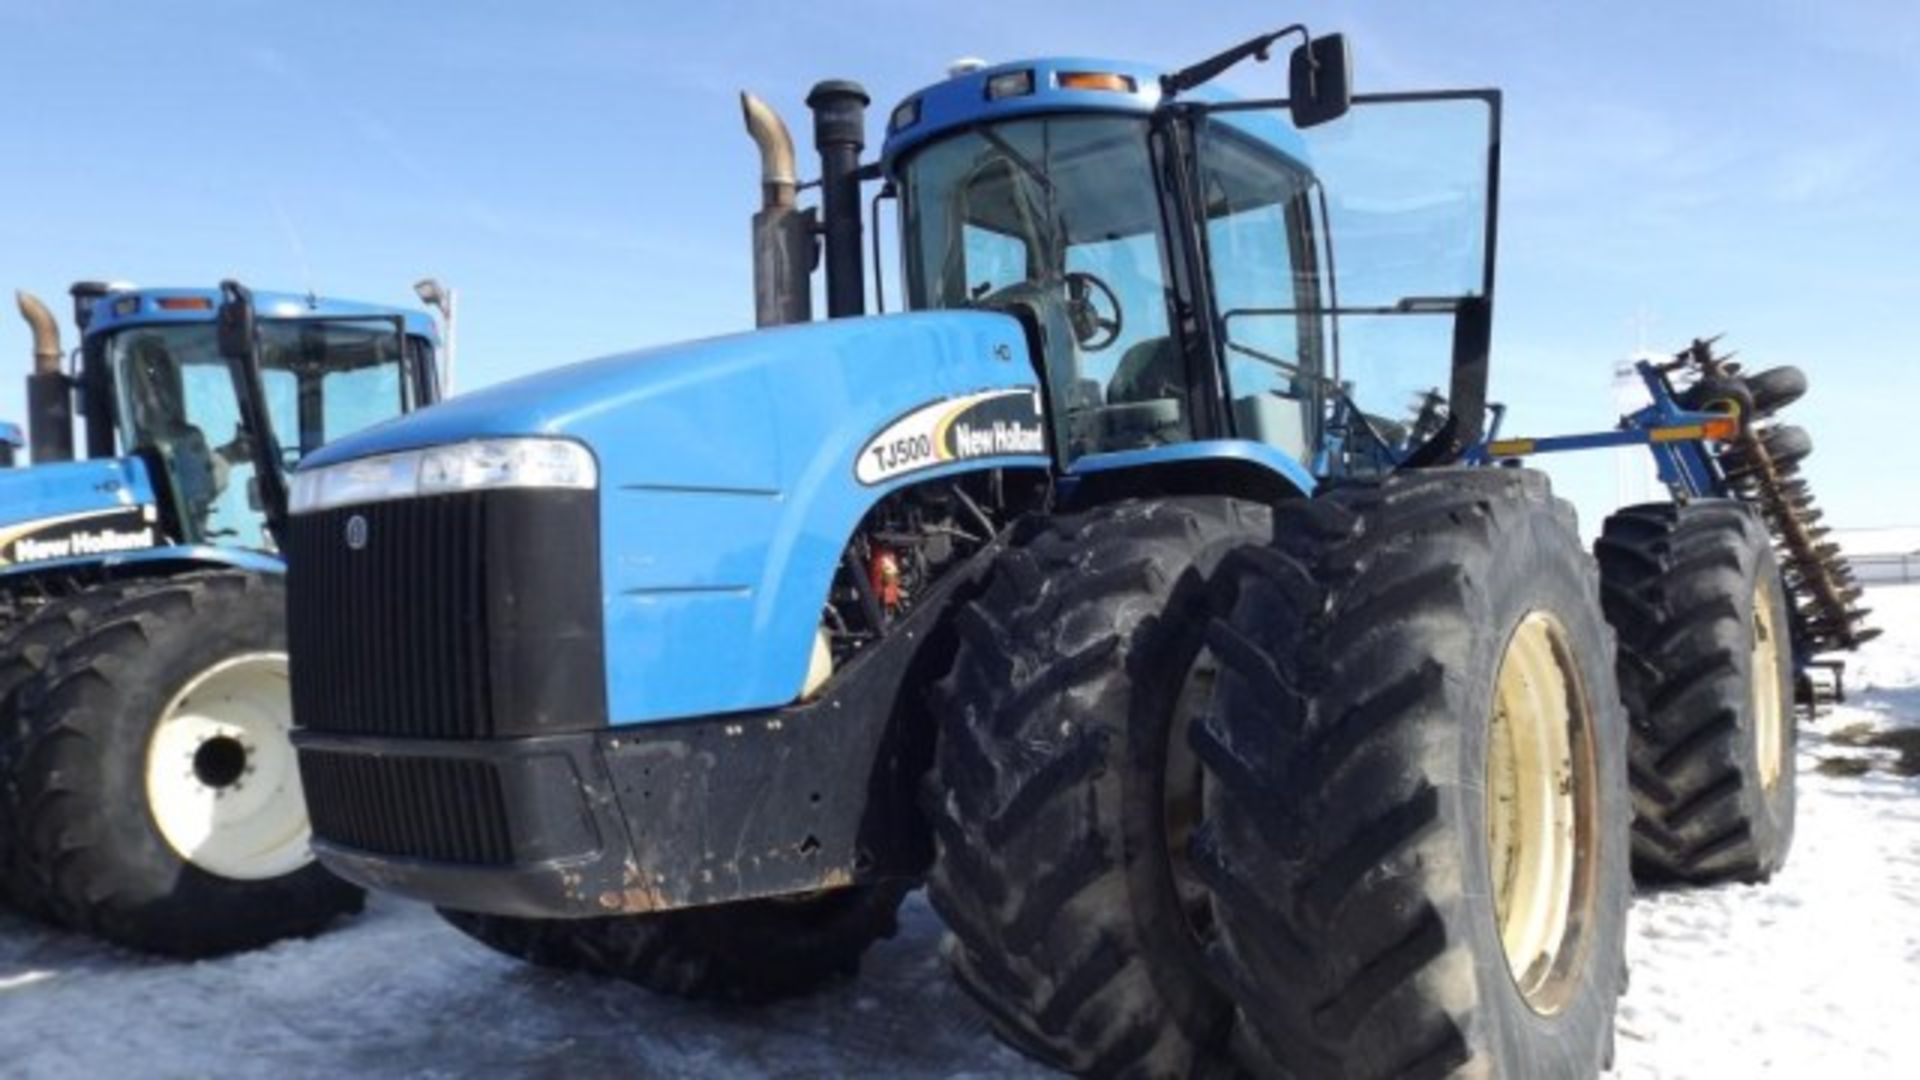 New Holland TJ500 Tractor '05, sn#RVS005048 4617 Hrs, 4WD, Fully Equipped Cab, 500 HP, 16/2 PS,